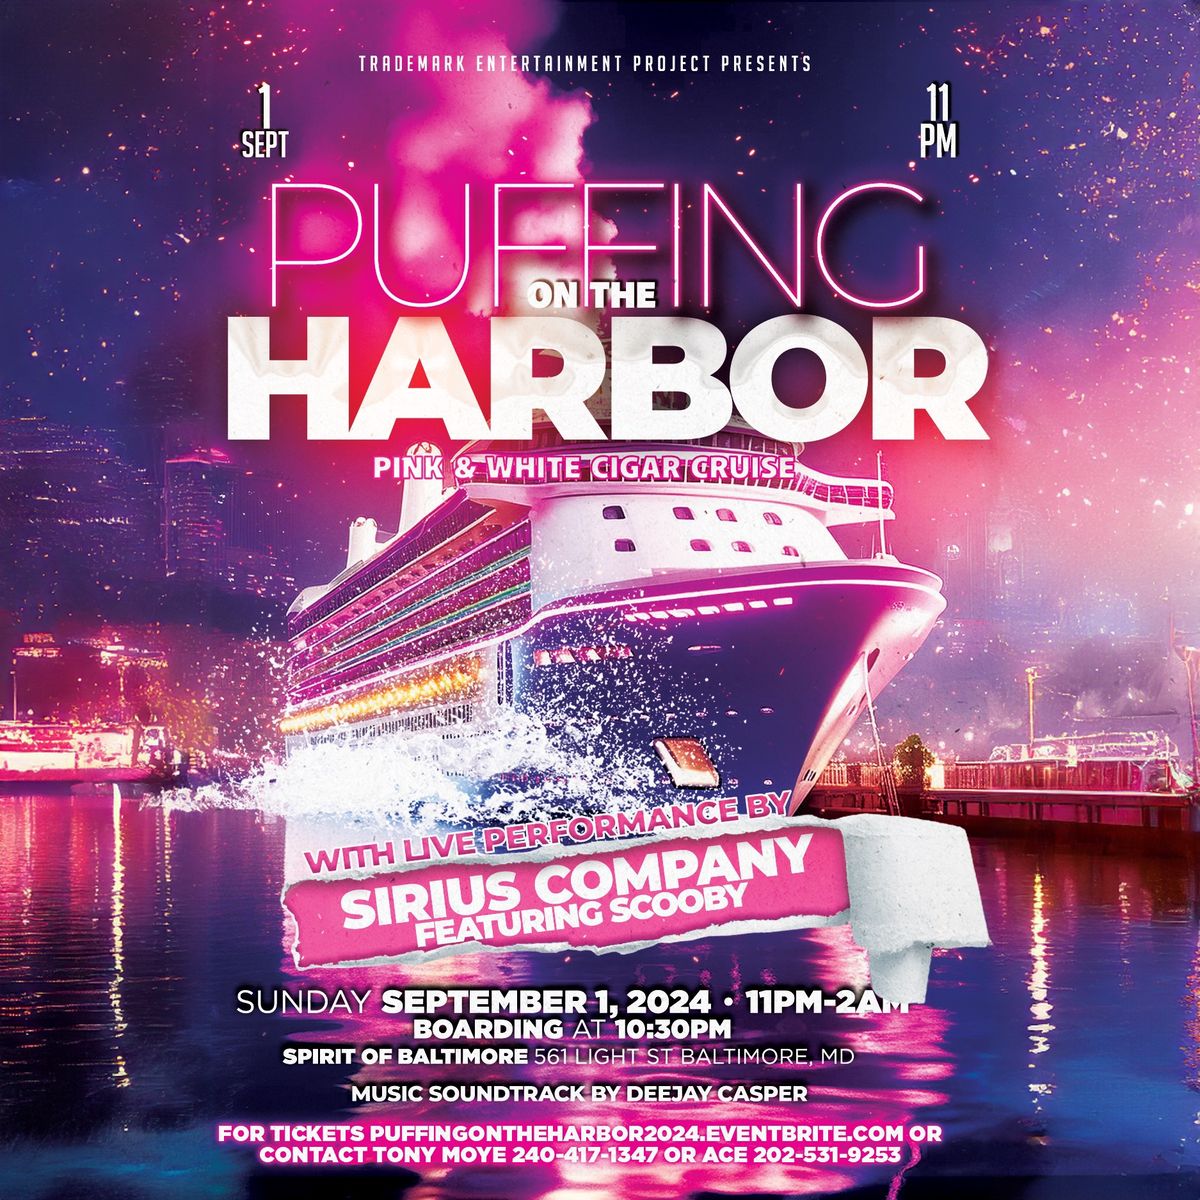 PUFFING ON THE HARBOR PINK & WHITE CIGAR CRUISE